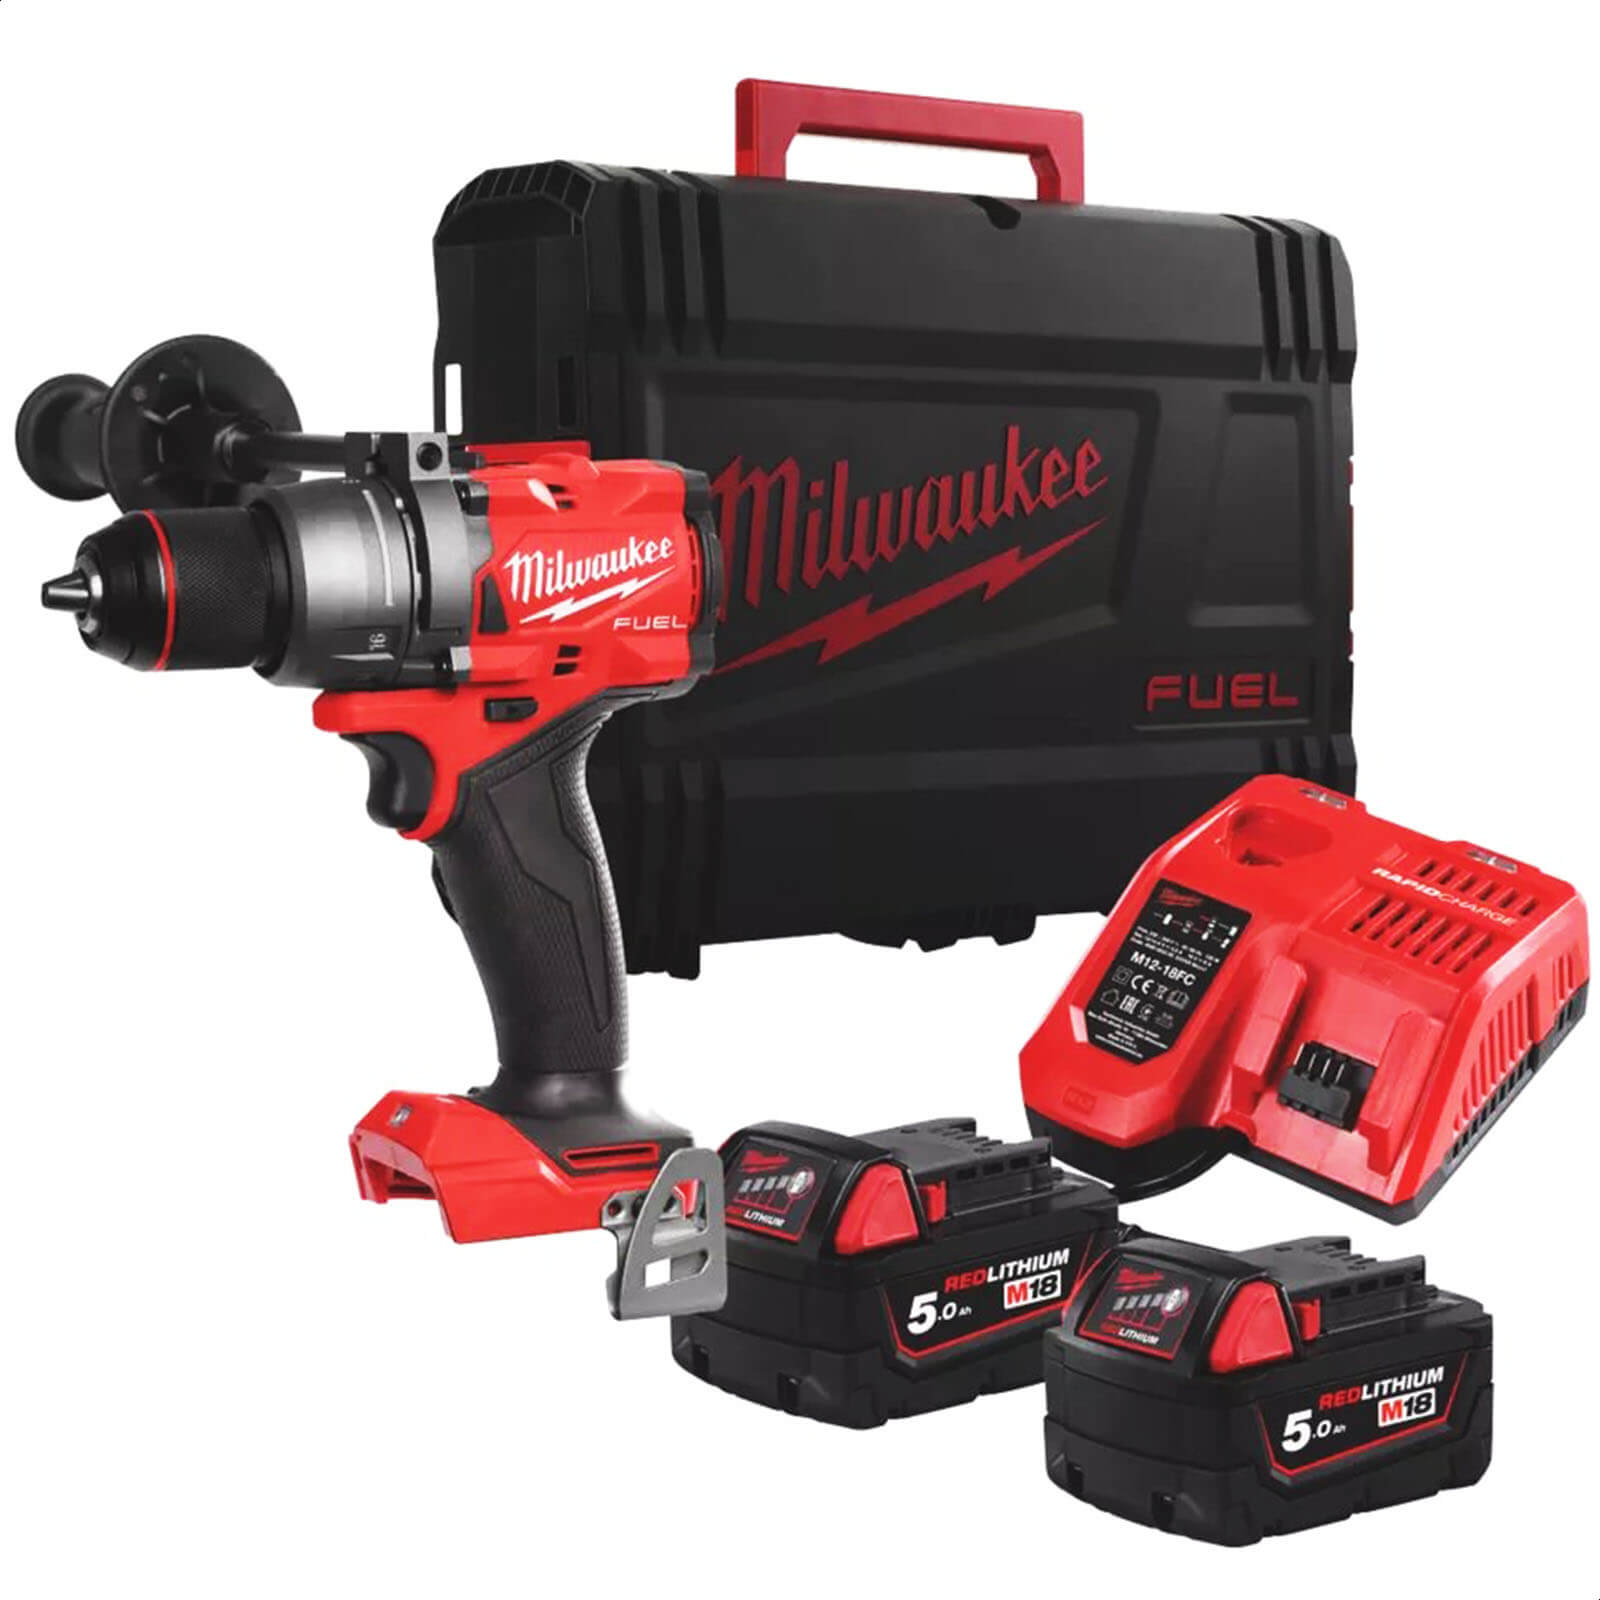 Image of Milwaukee M18 FPD3 Fuel 18v Cordless Brushless Combi Drill 2 x 5ah Li-ion Charger Case